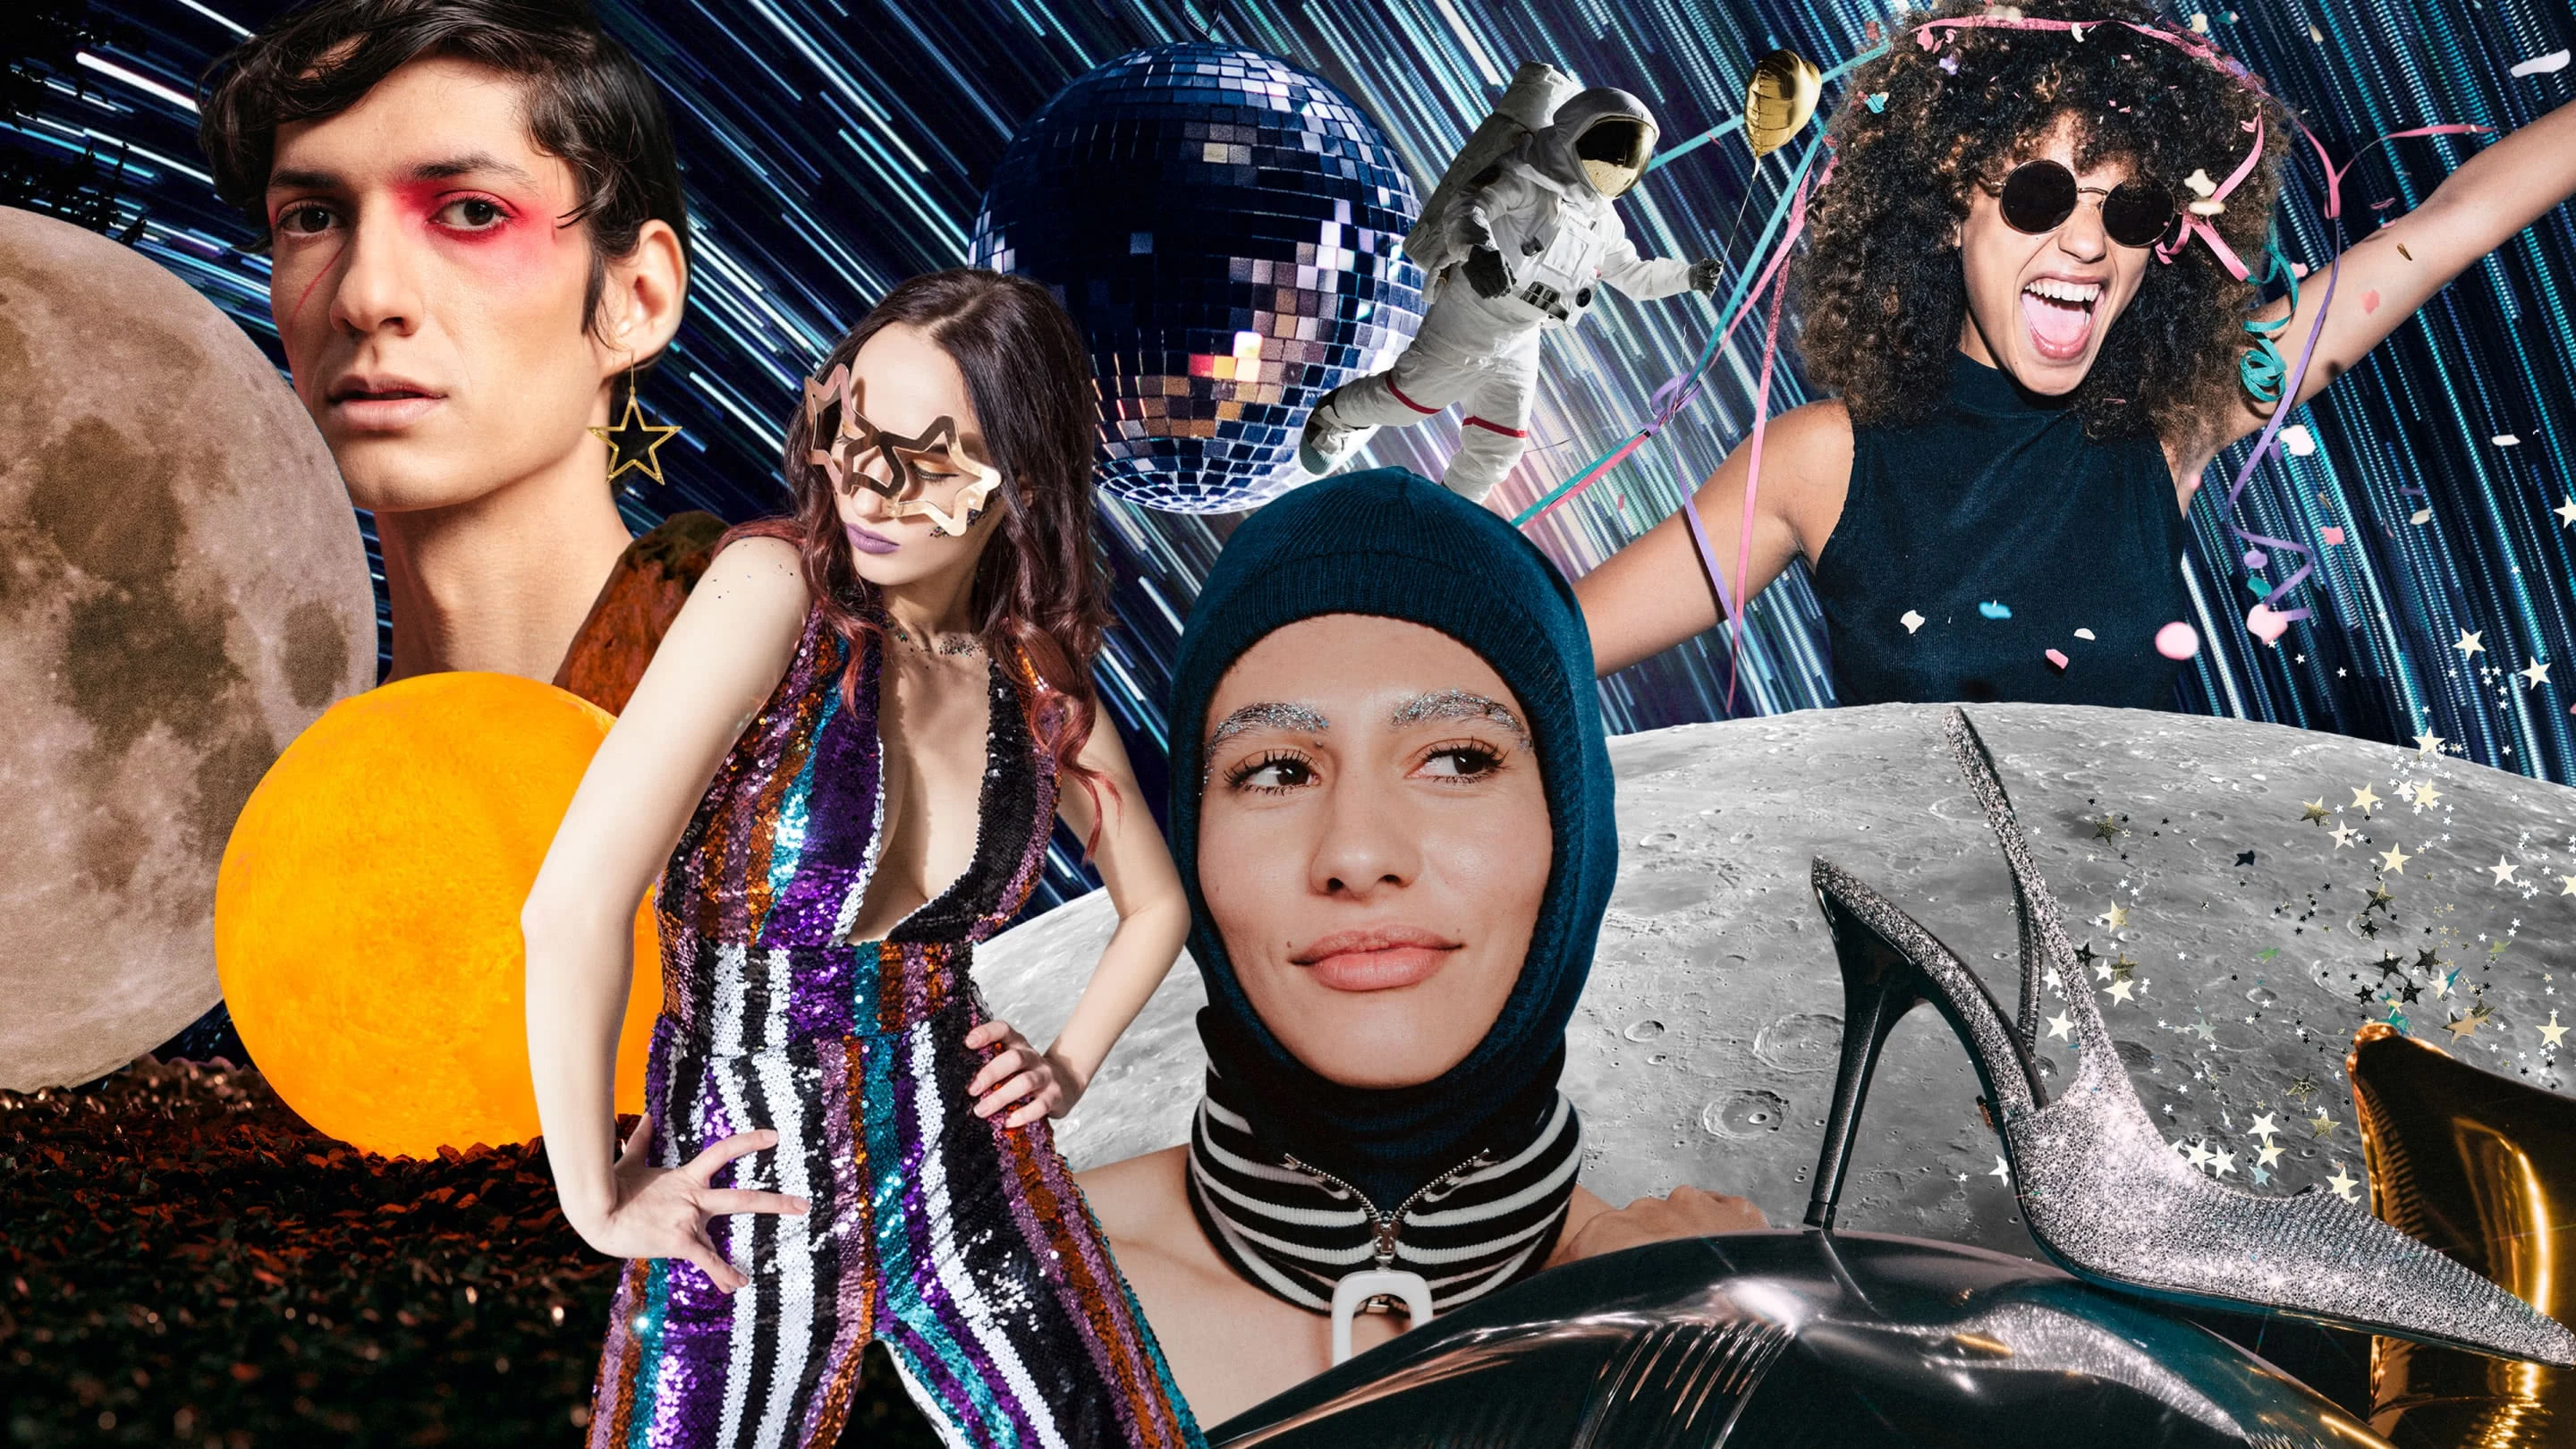 Pink and yellow moons at left. White man in red eye makeup. White woman with star glasses in striped jumpsuit. Arab woman in black balaclava at center, Black woman at right in black shades and top. Large moon and silver stiletto. Disco ball and astronaut.